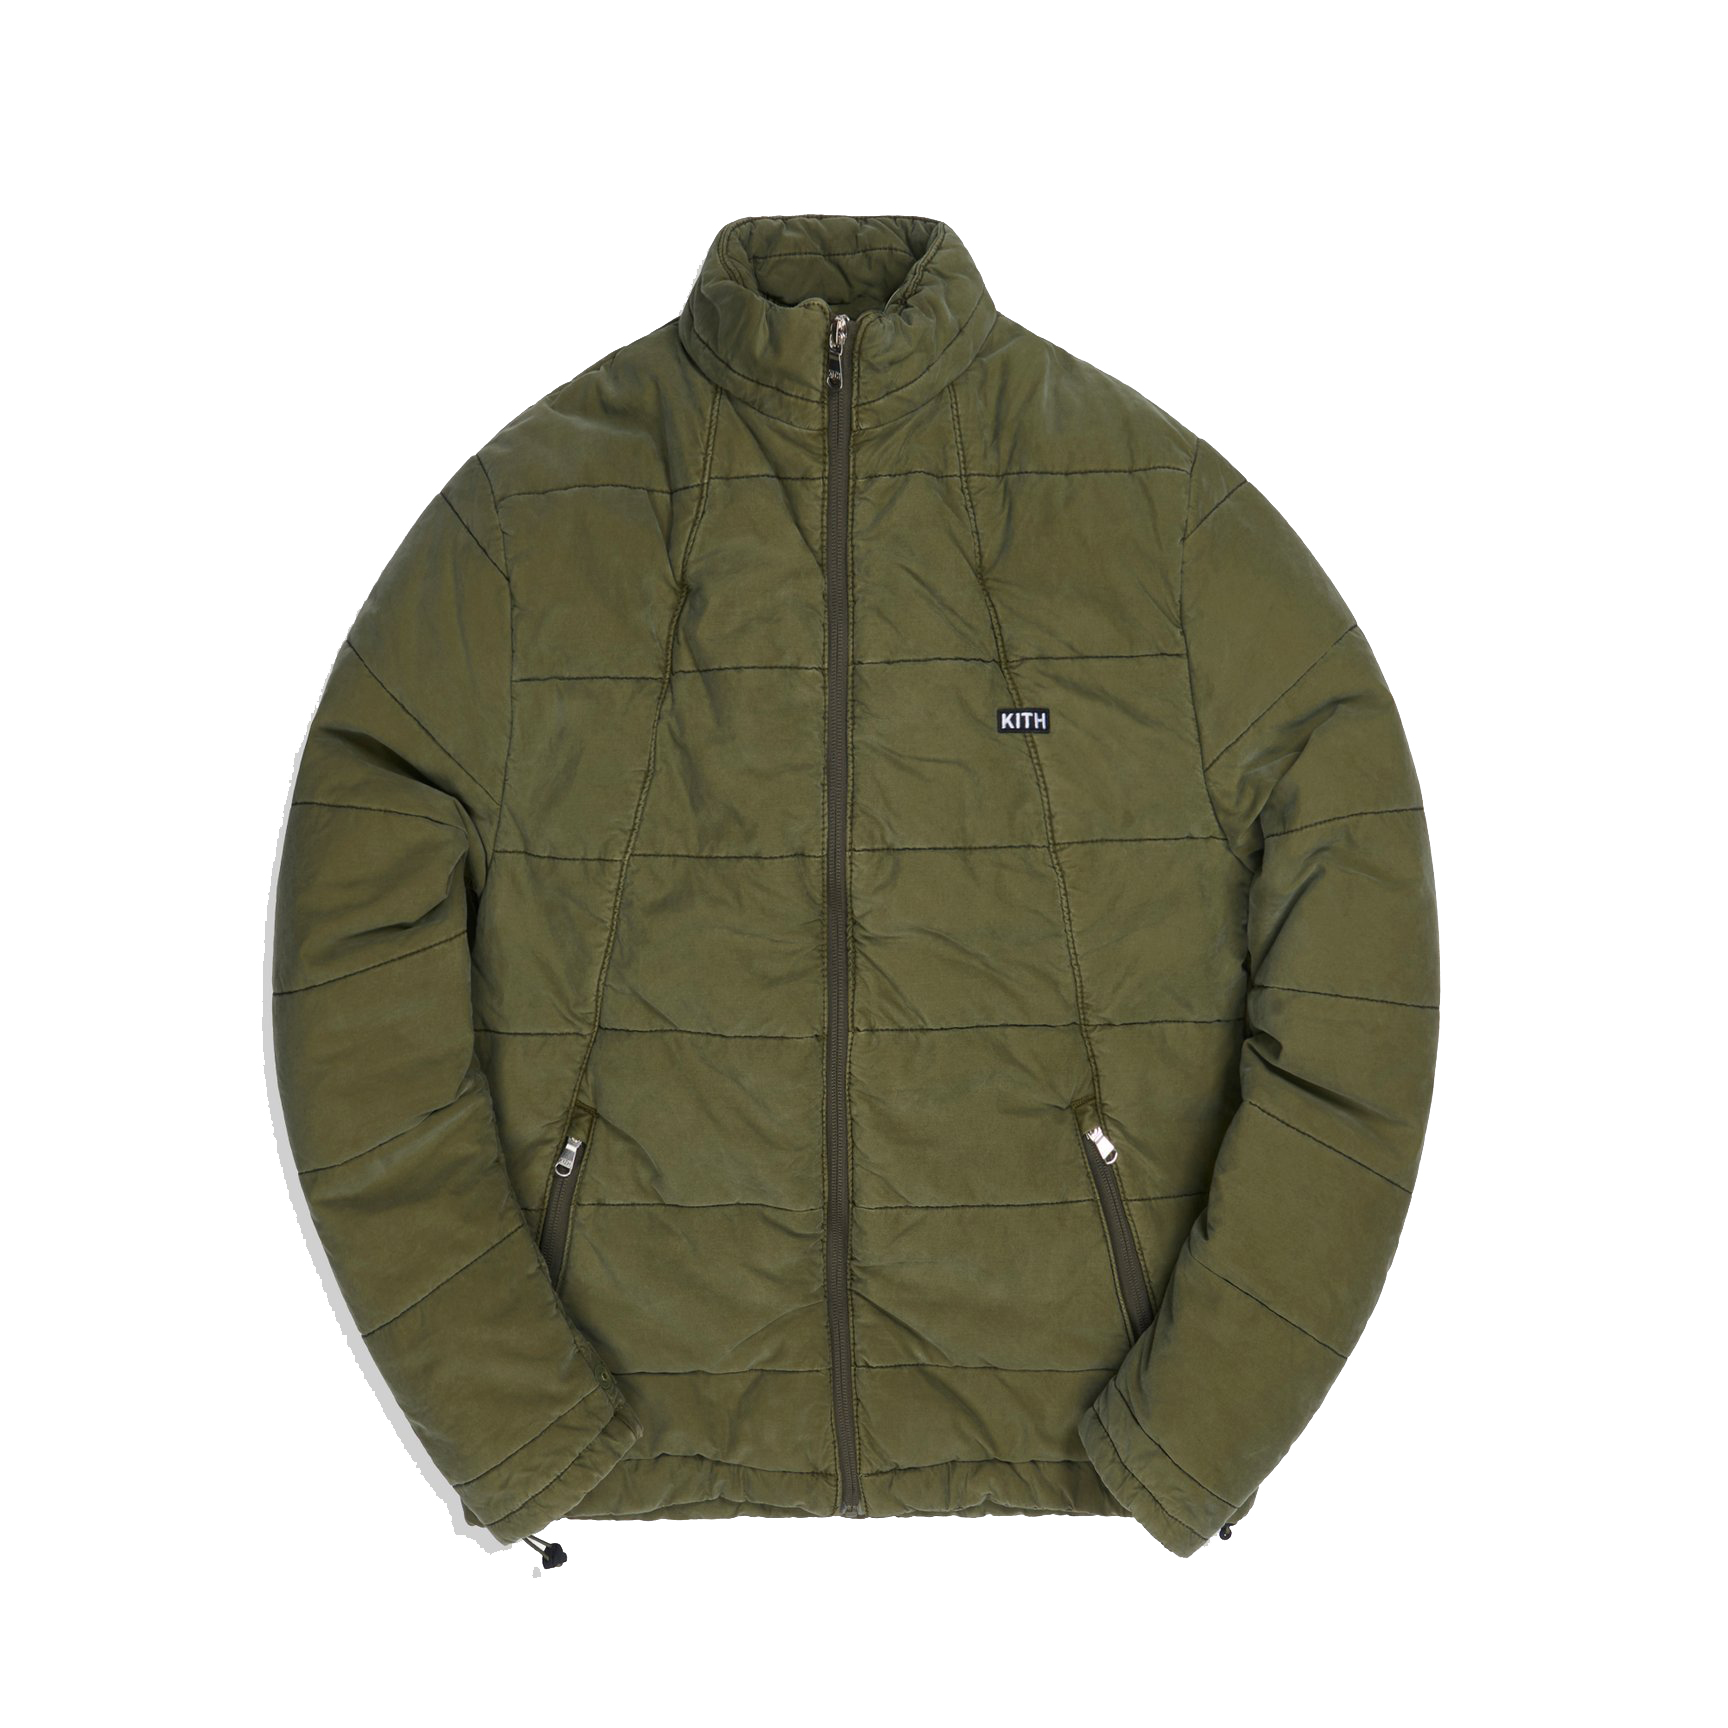 kith QUILTED JACKET olive ジャケット | www.innoveering.net